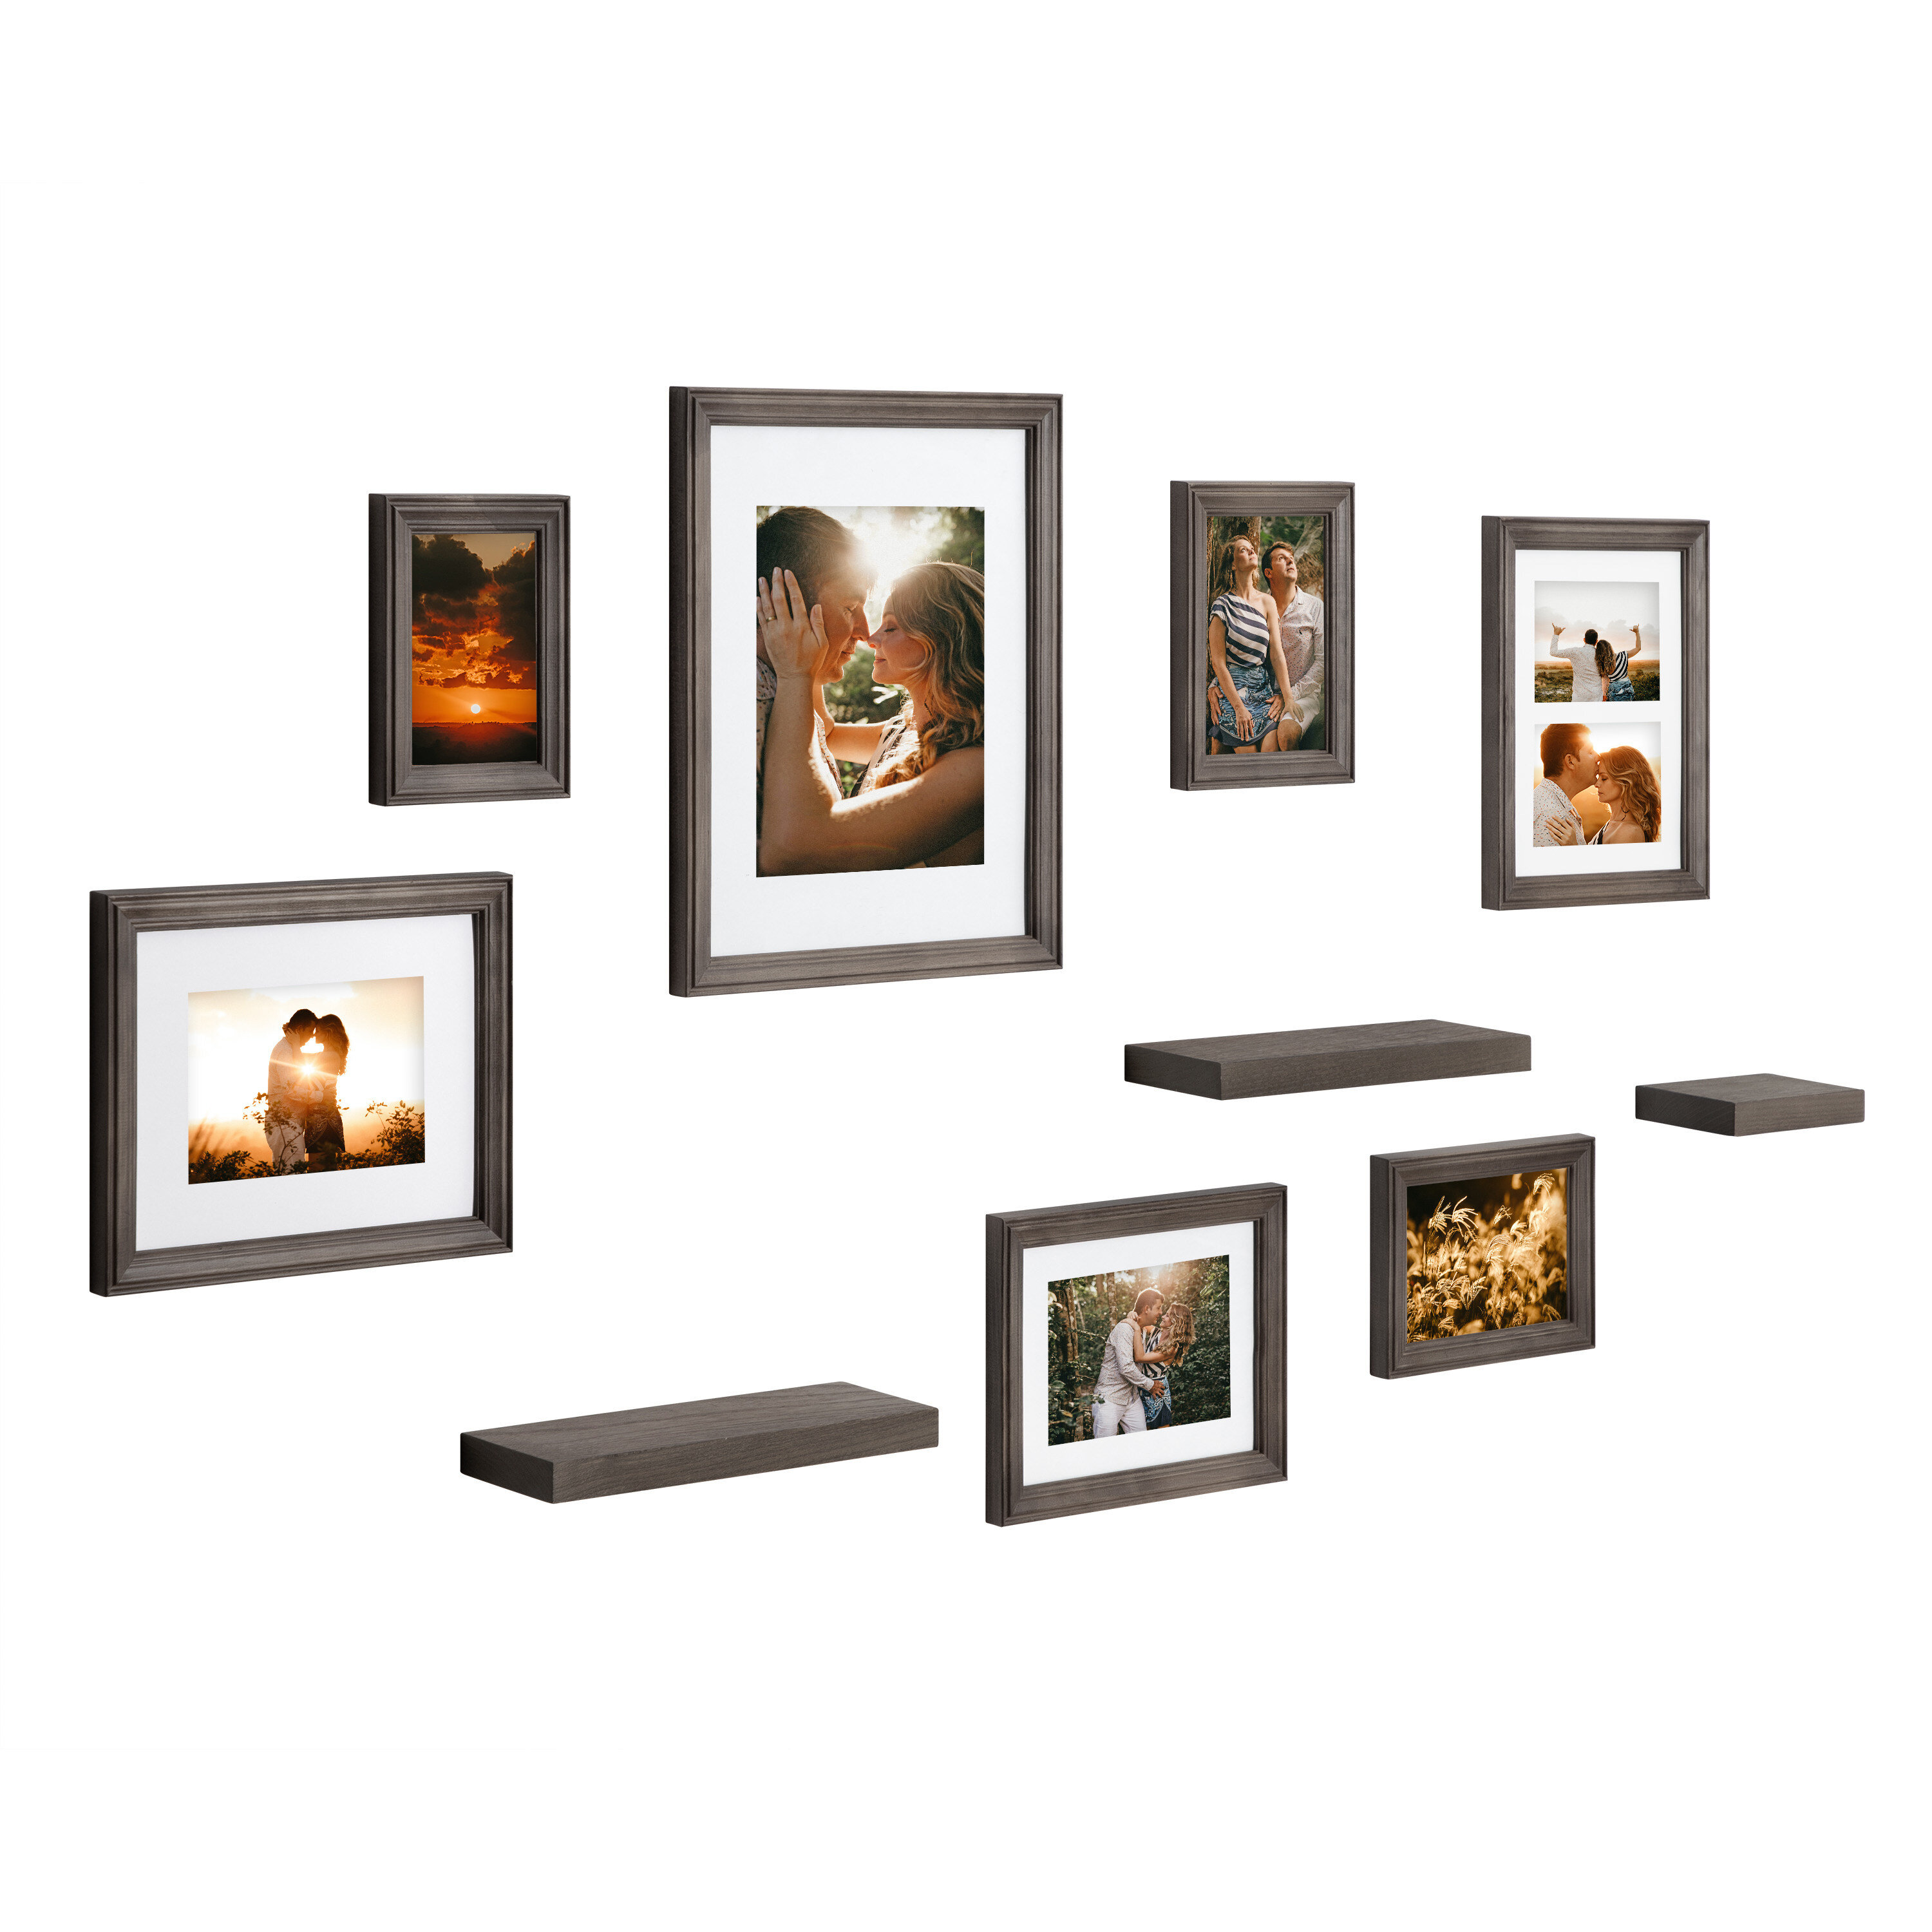  DesignOvation Gallery 16x20 matted to 8x10 Wood Picture Frame,  Set of 2, Natural, 2: Posters & Prints